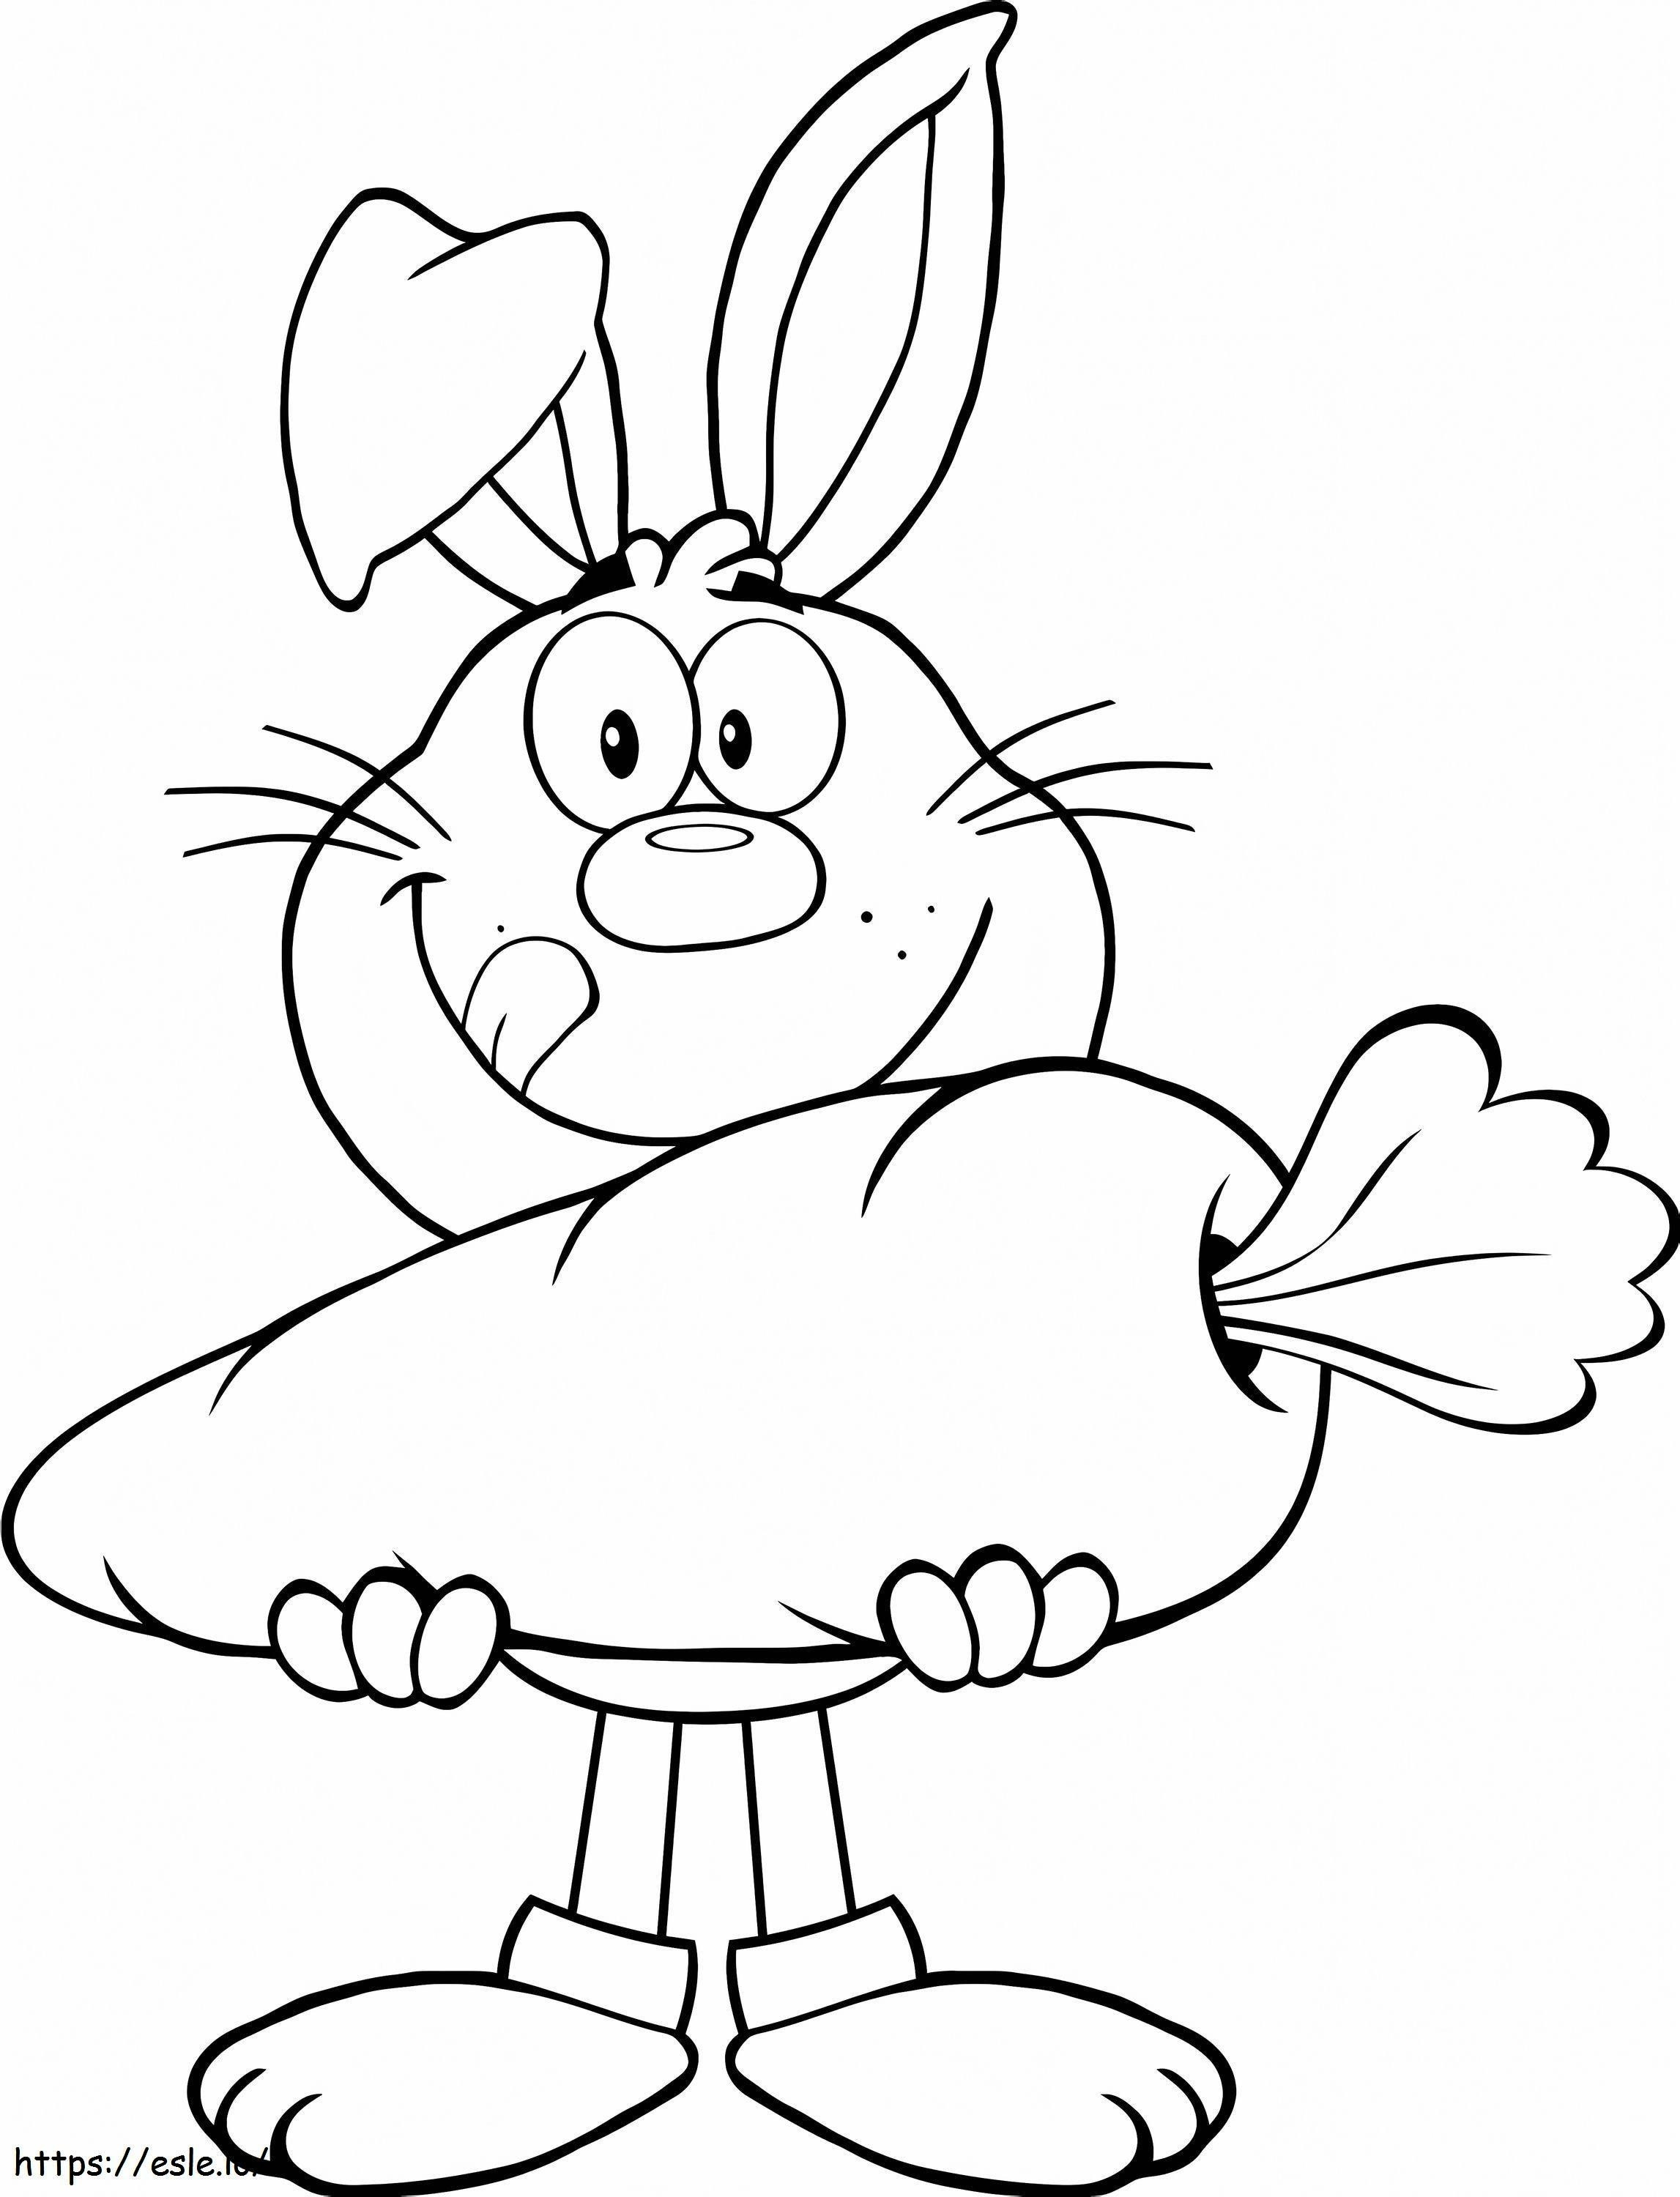 1543974569 Hungry Rabbit Holding A Big Carrot coloring page